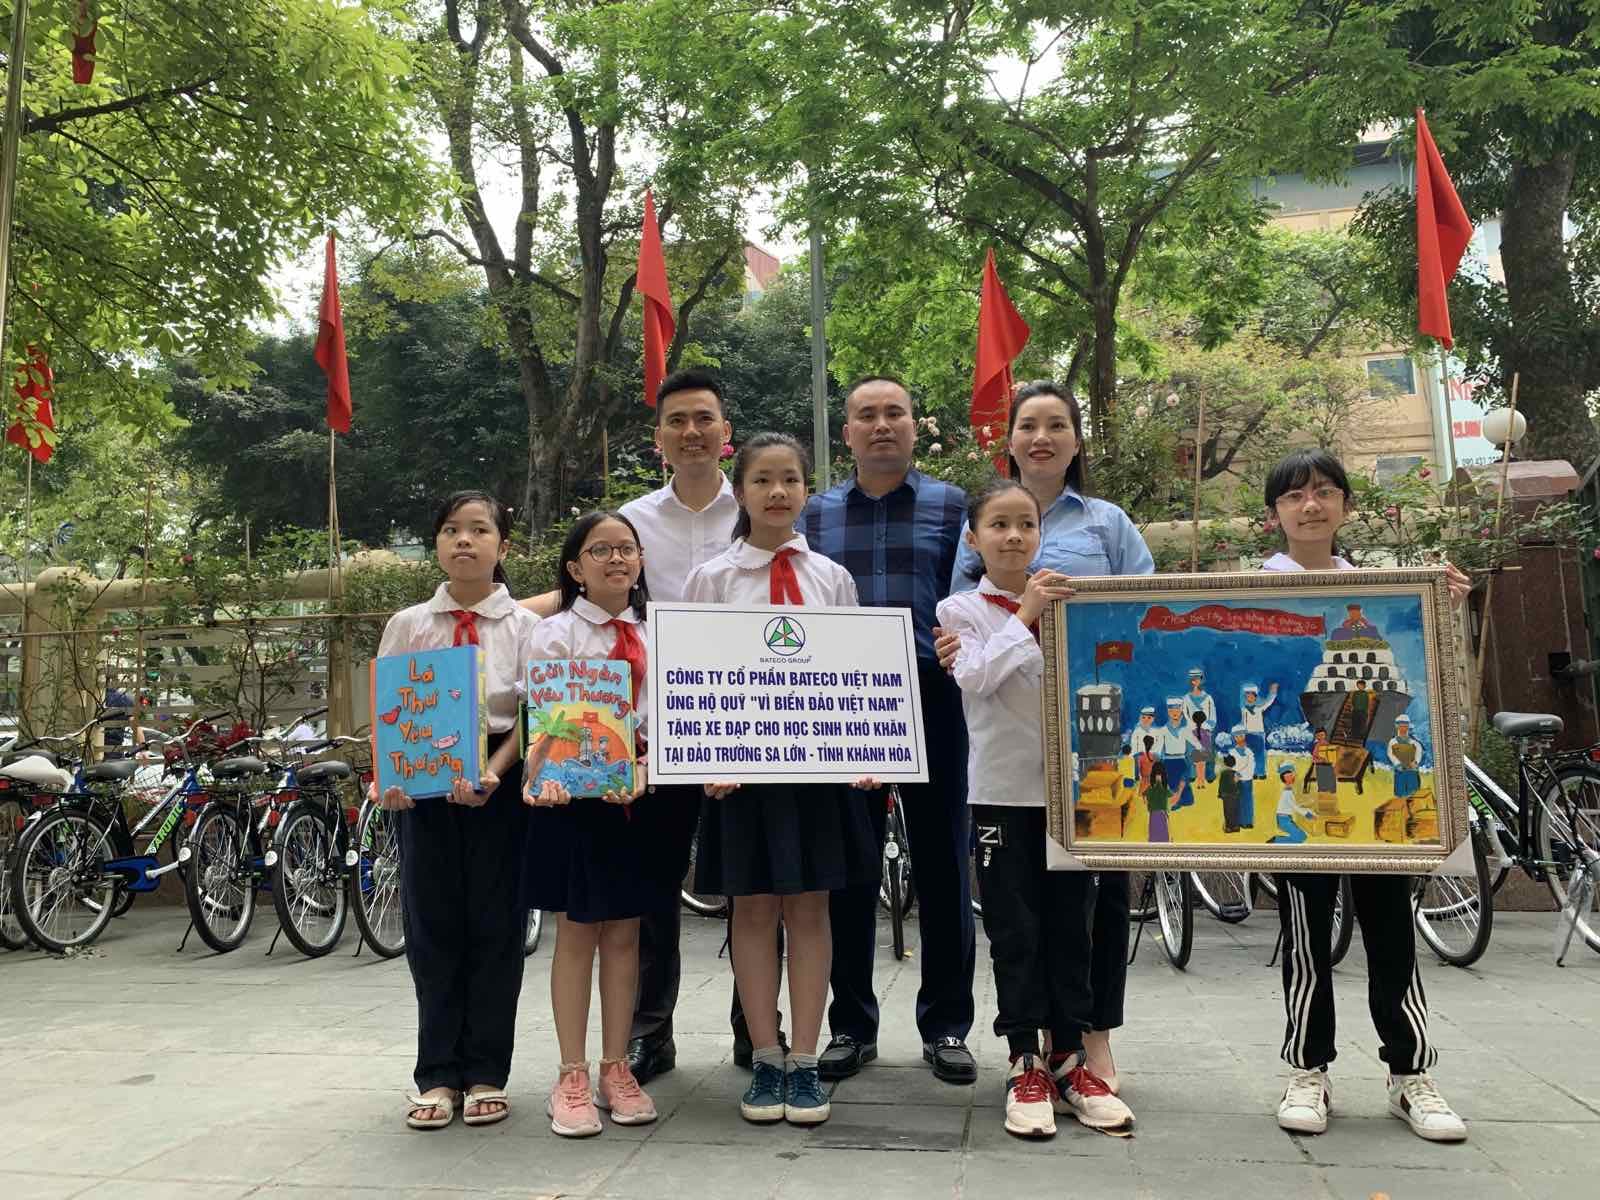 Happy International Children&#8217;s Day June 1 &#8211; Bateco Group donates bicycles to disadvantaged students on Truong Sa Lon Island, Khanh Hoa Province